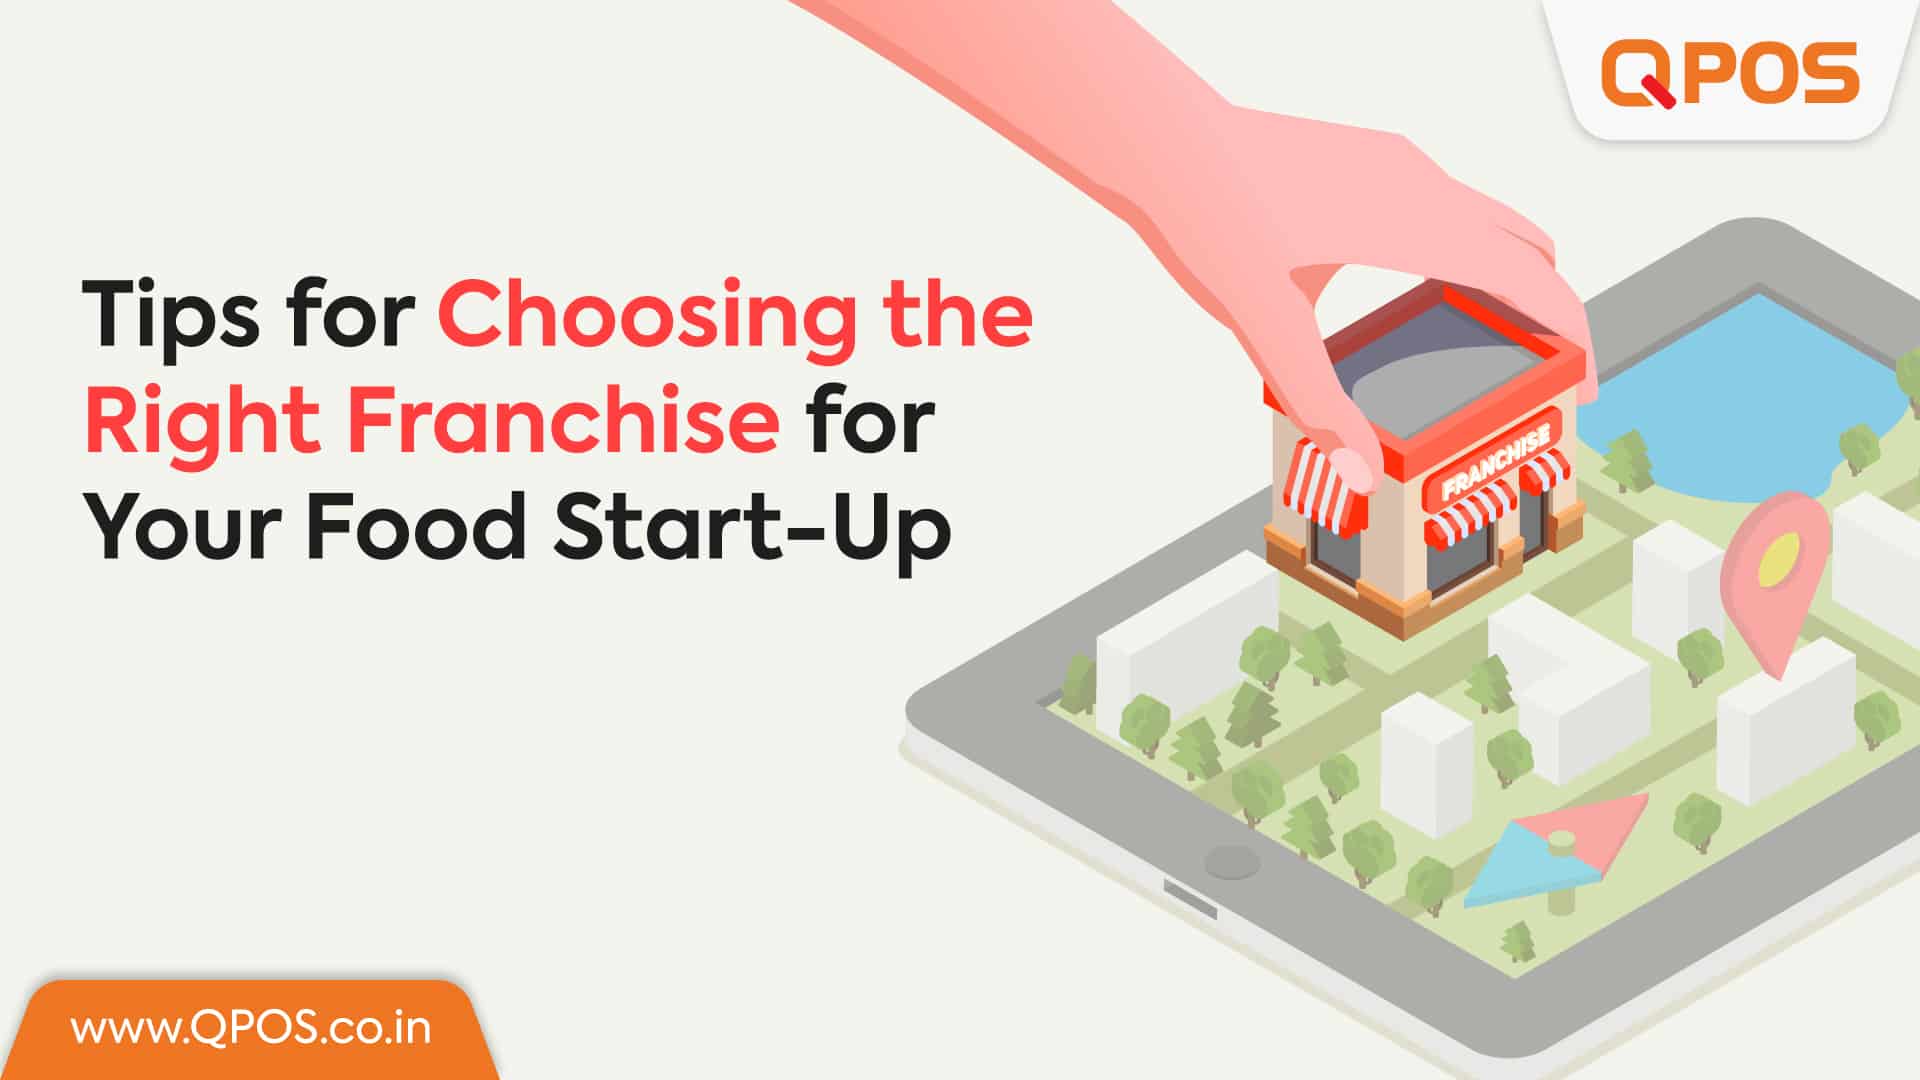 Tips for Choosing the Right Franchise for Your Food Start-Up